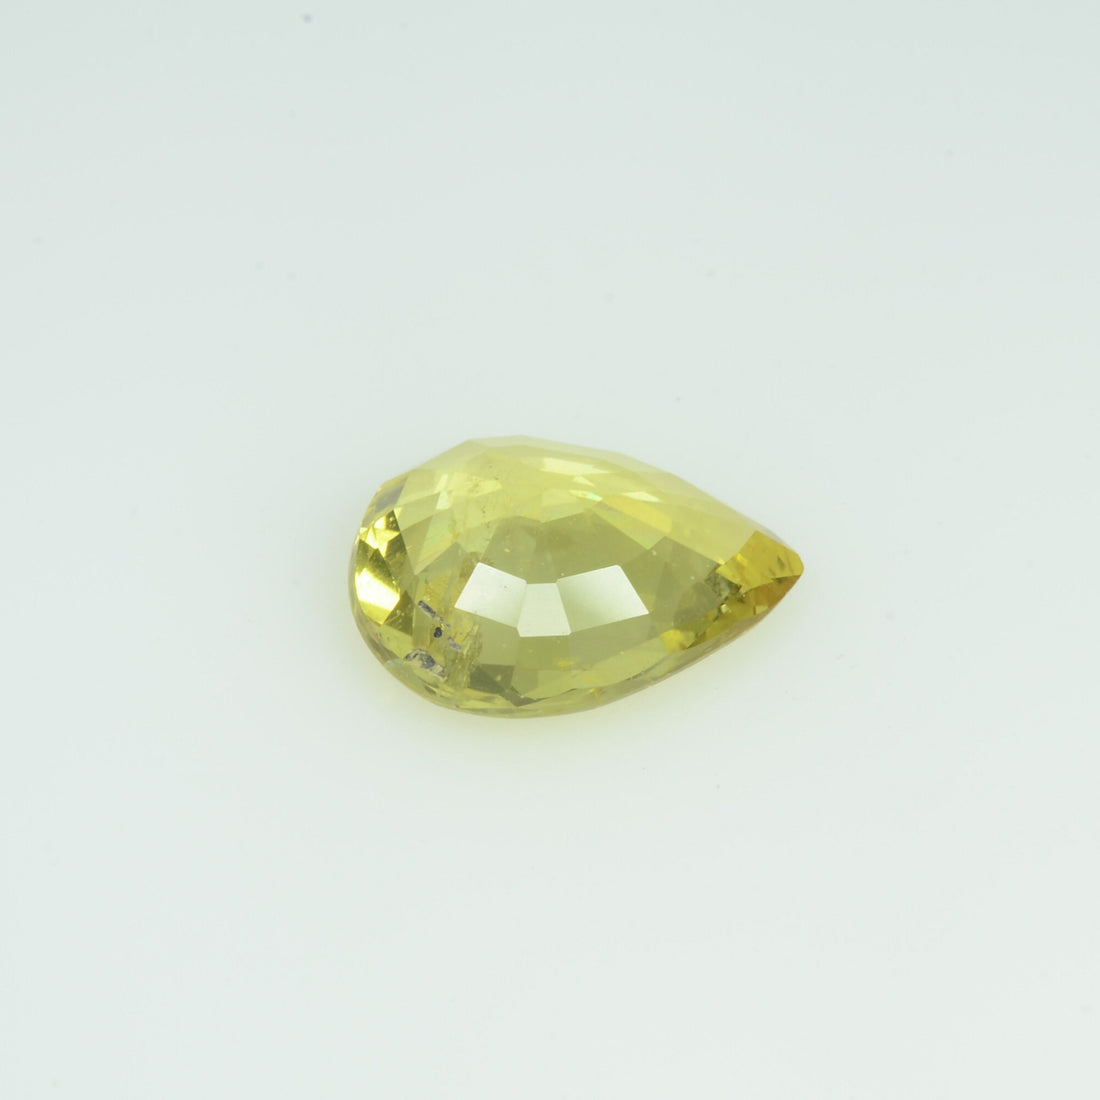 1.65 Cts Natural Yellow Sapphire Loose Gemstone Pear Cut